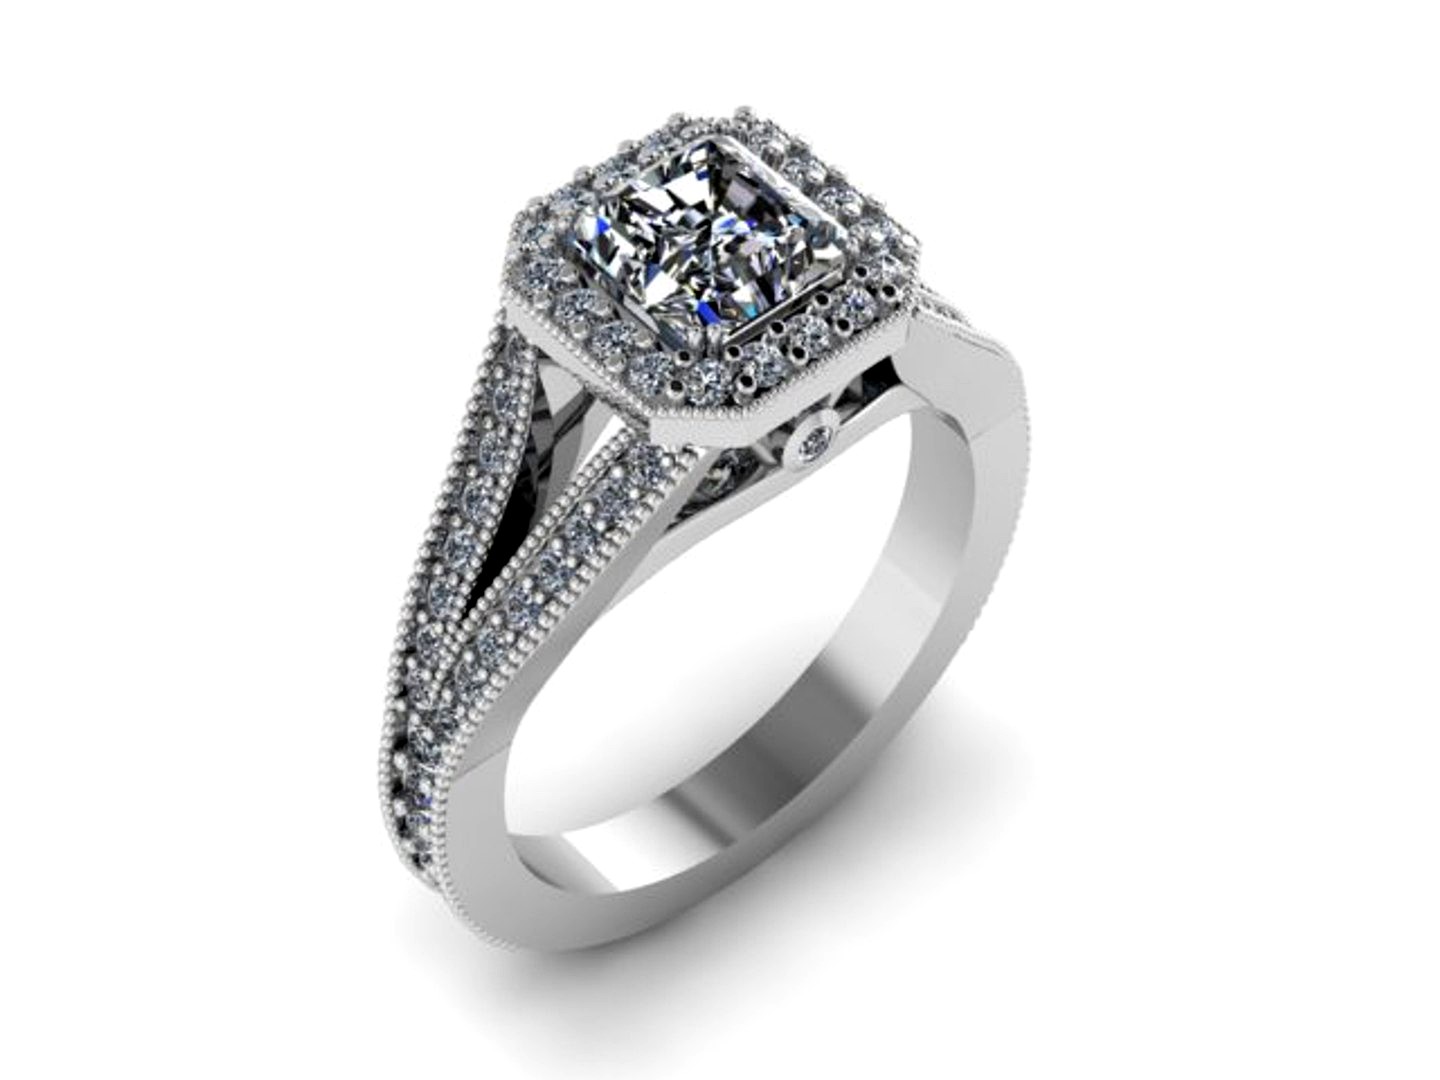 Wedding ring with